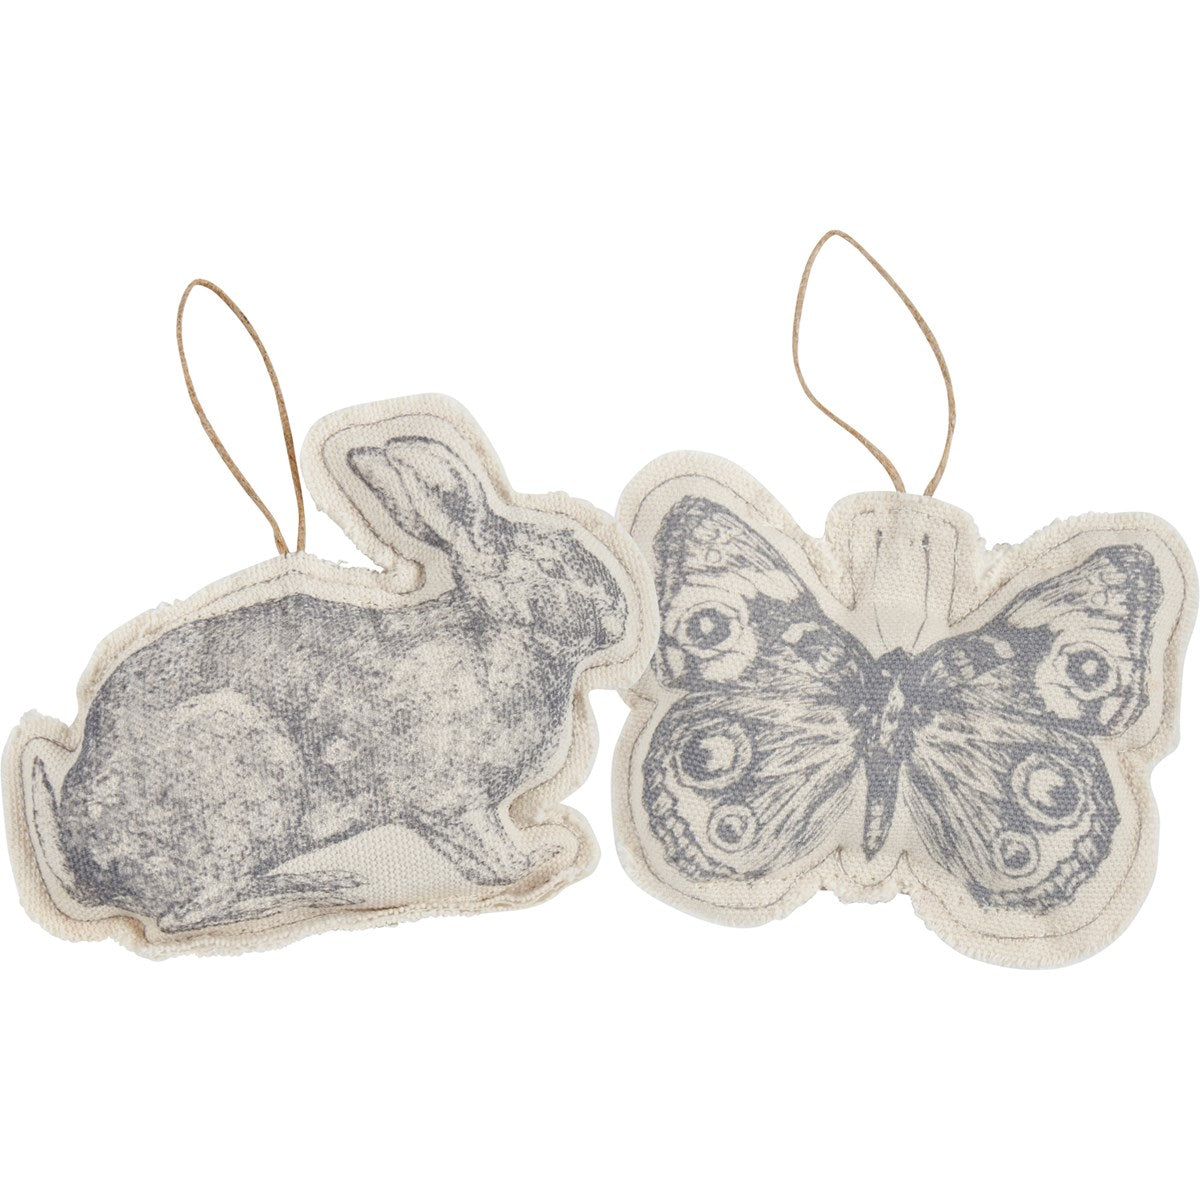 Surprise Me Sale 🤭 Set of 2 Rabbit And Butterfly Fabric Ornaments